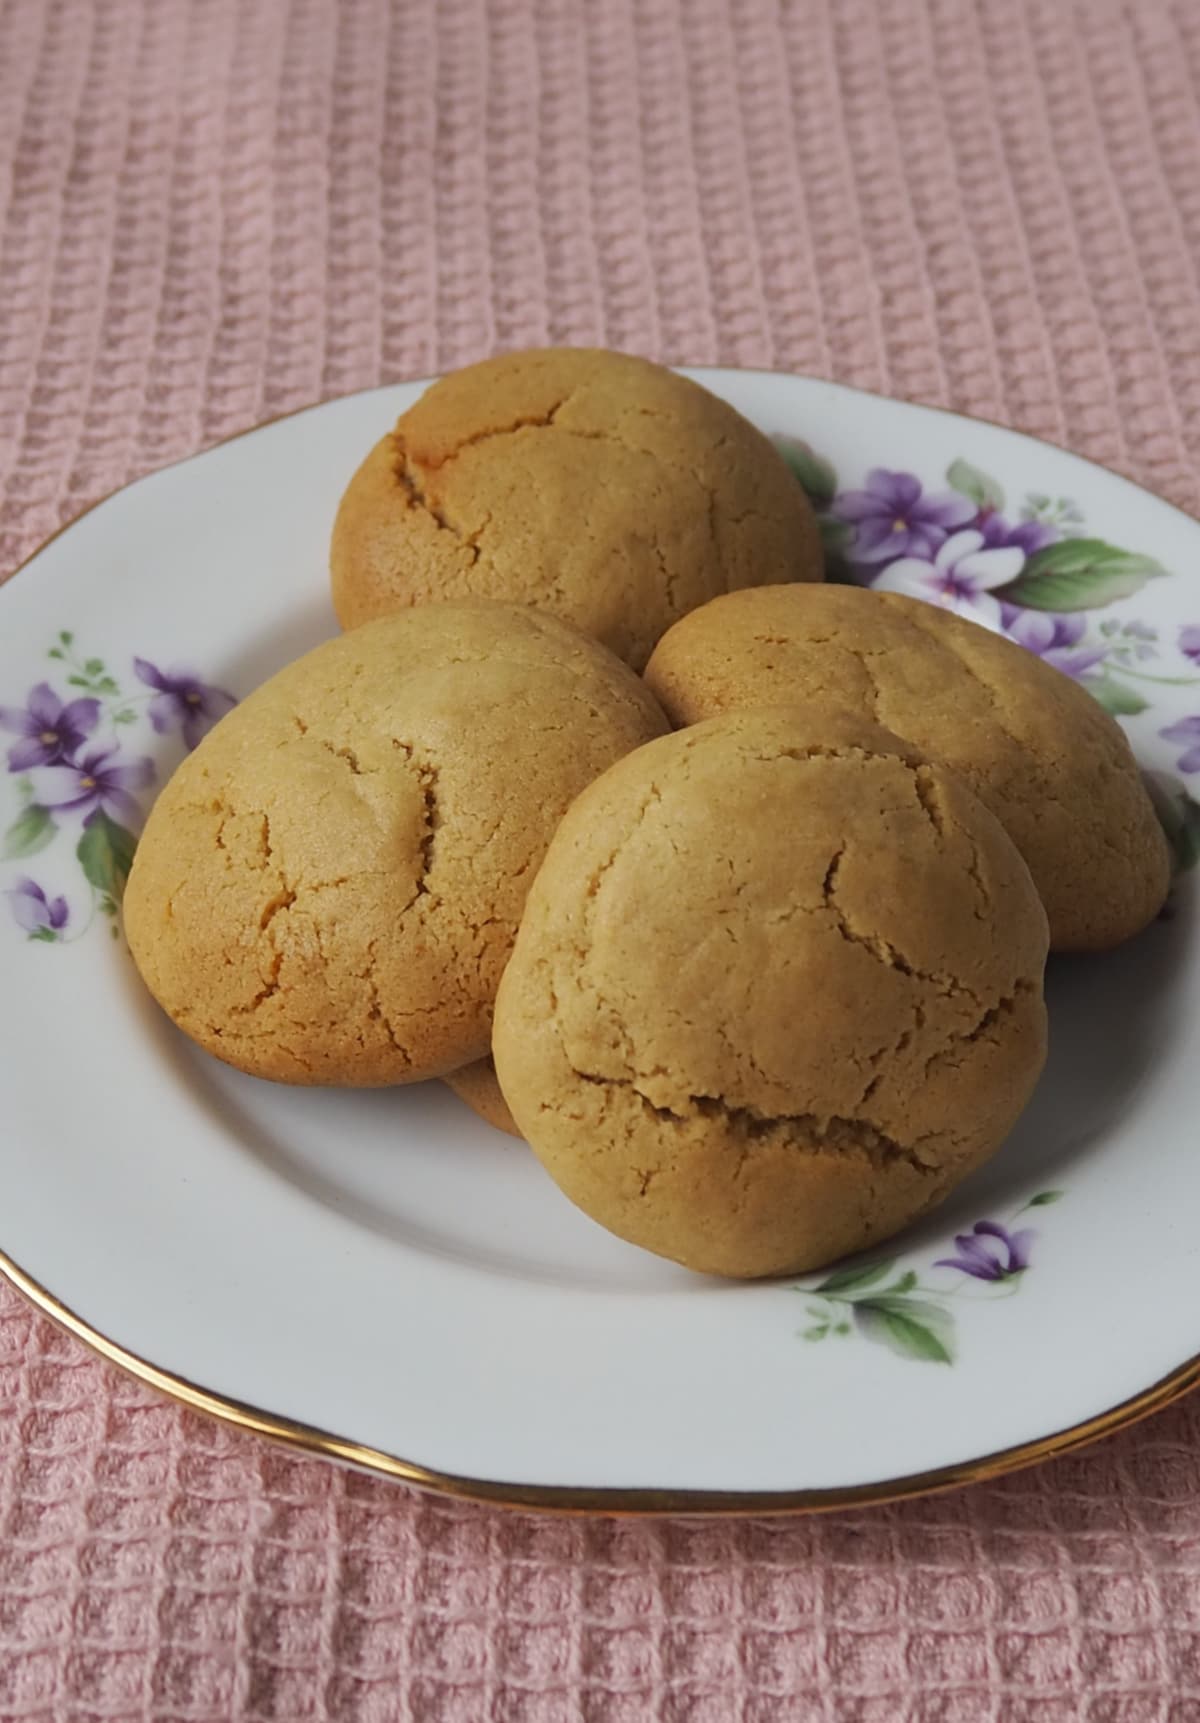 Four Caramel Cookies sitting on a decorative plate with gold edging.